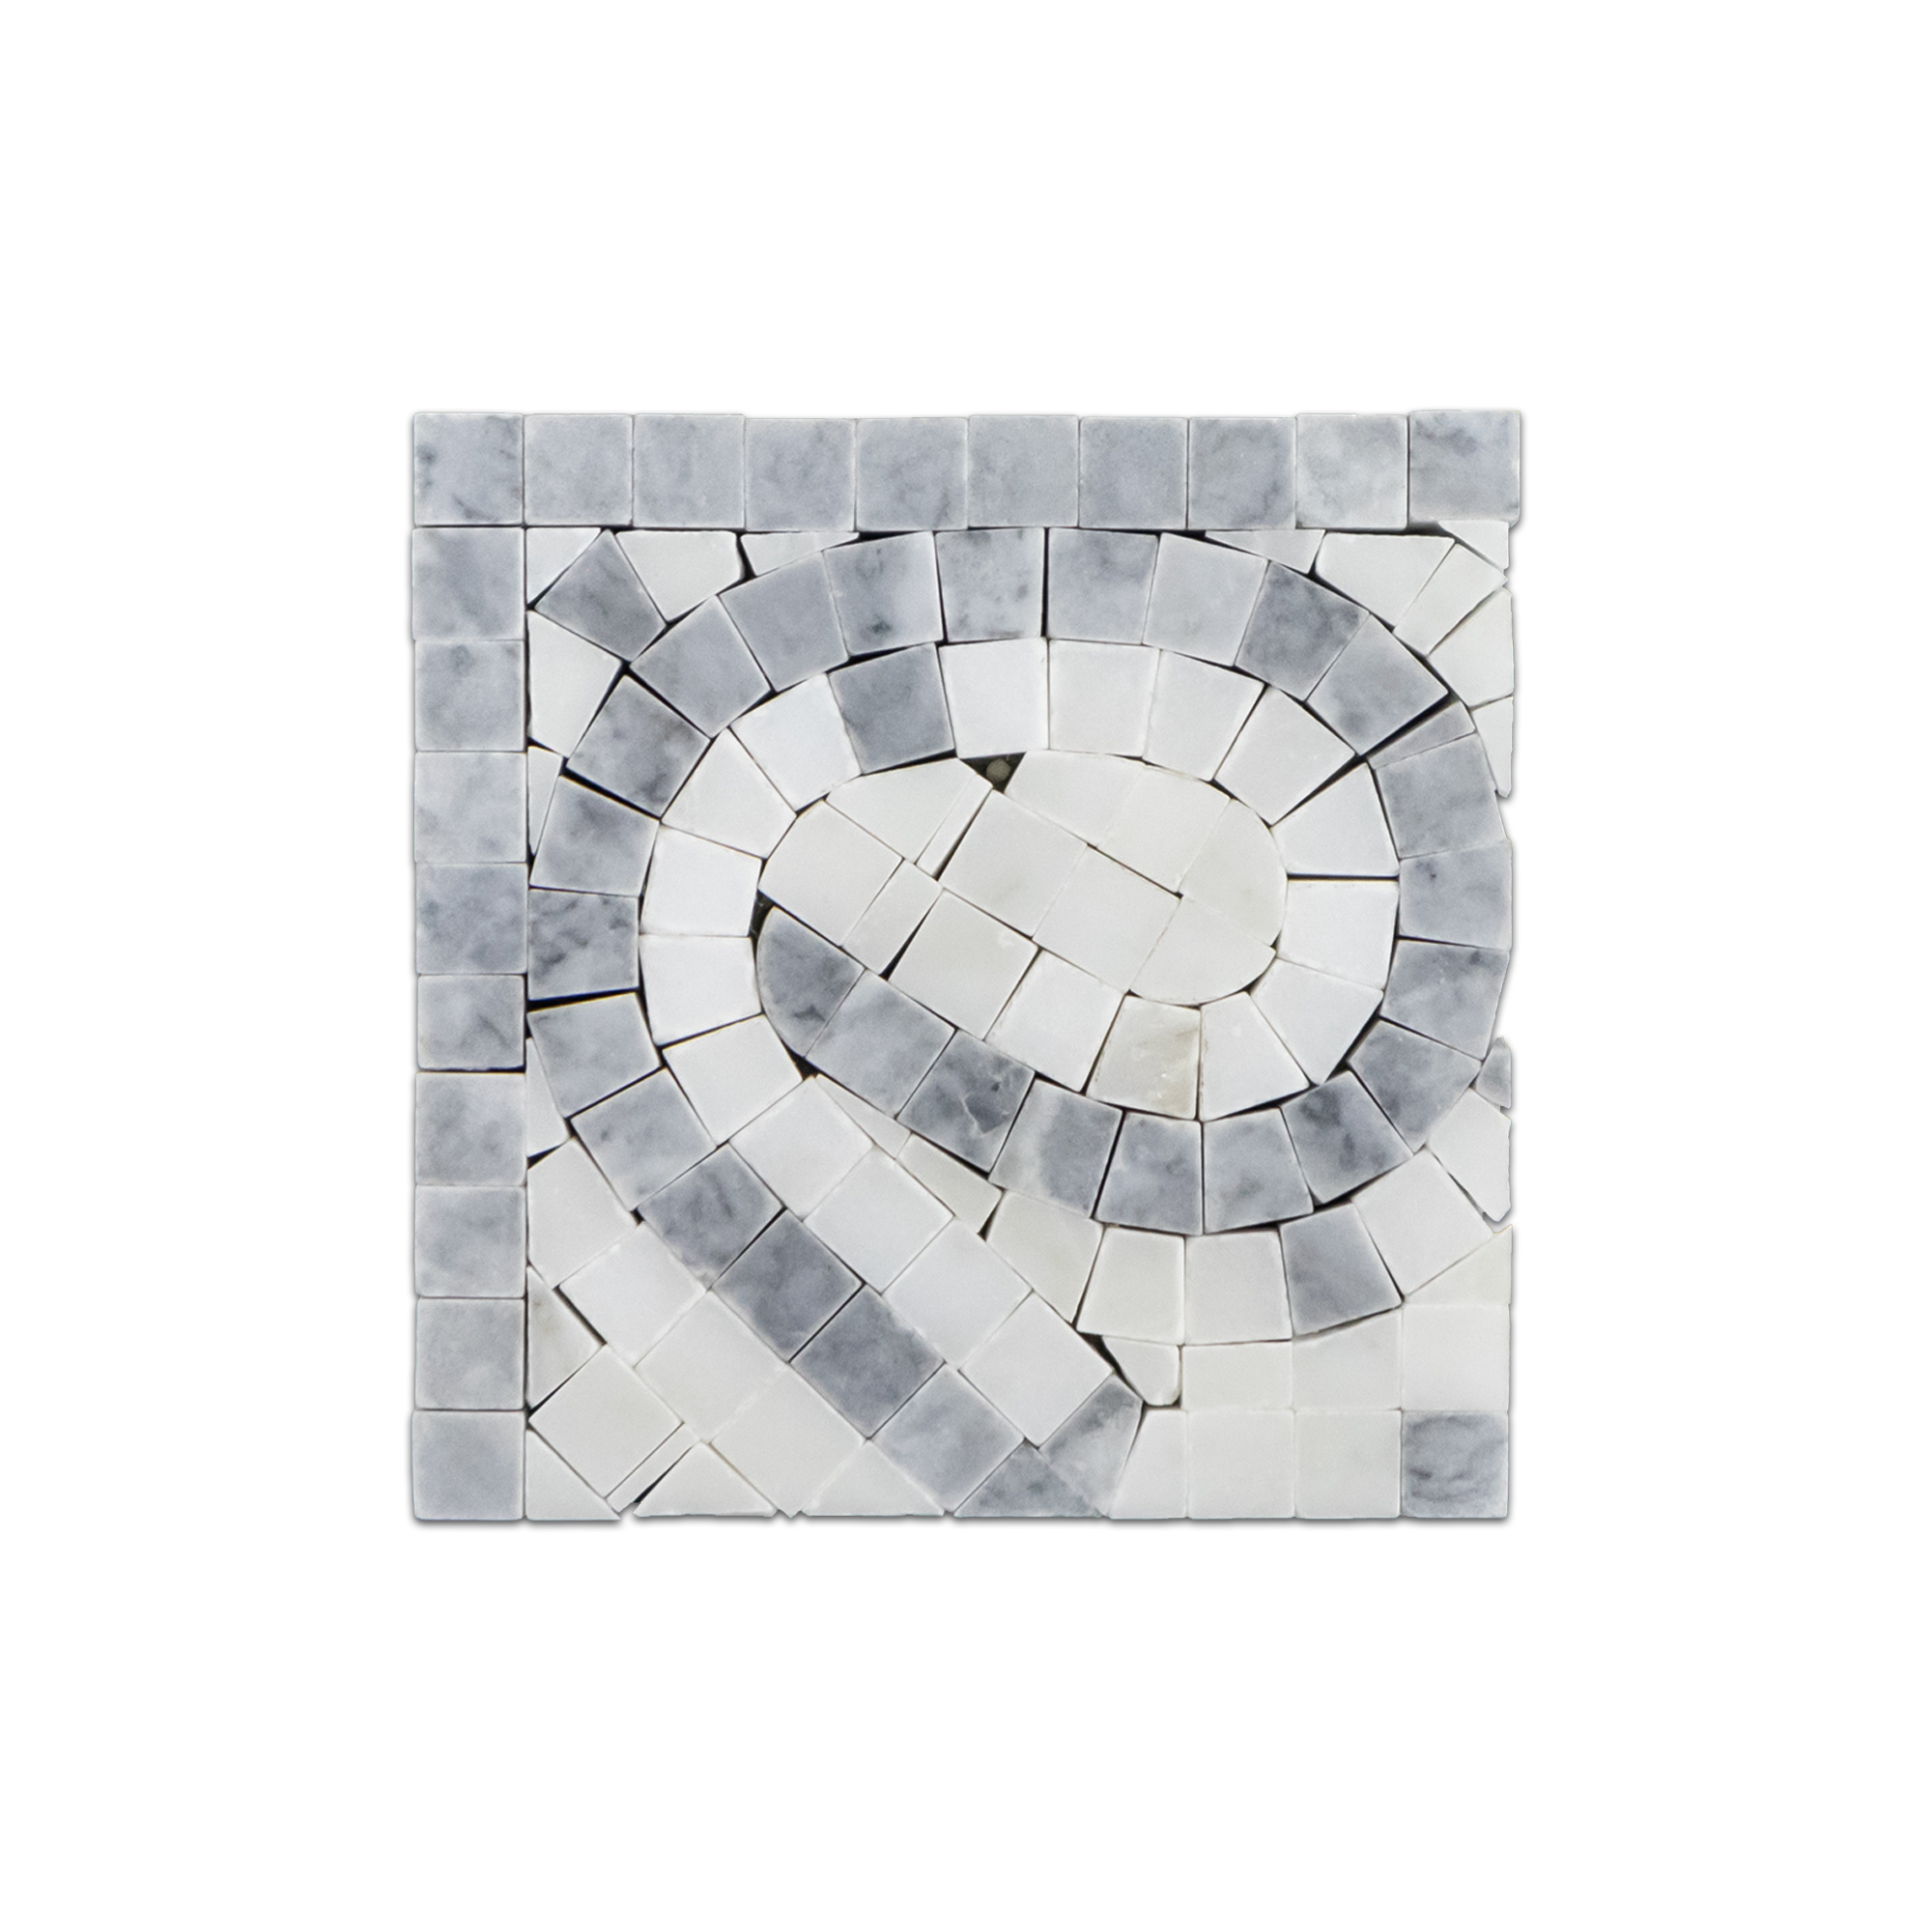 Elon Pacific Gray Pearl White Marble Wave Border Mosaic 4x12x0.375 Polished AM1004P Surface Group International Product